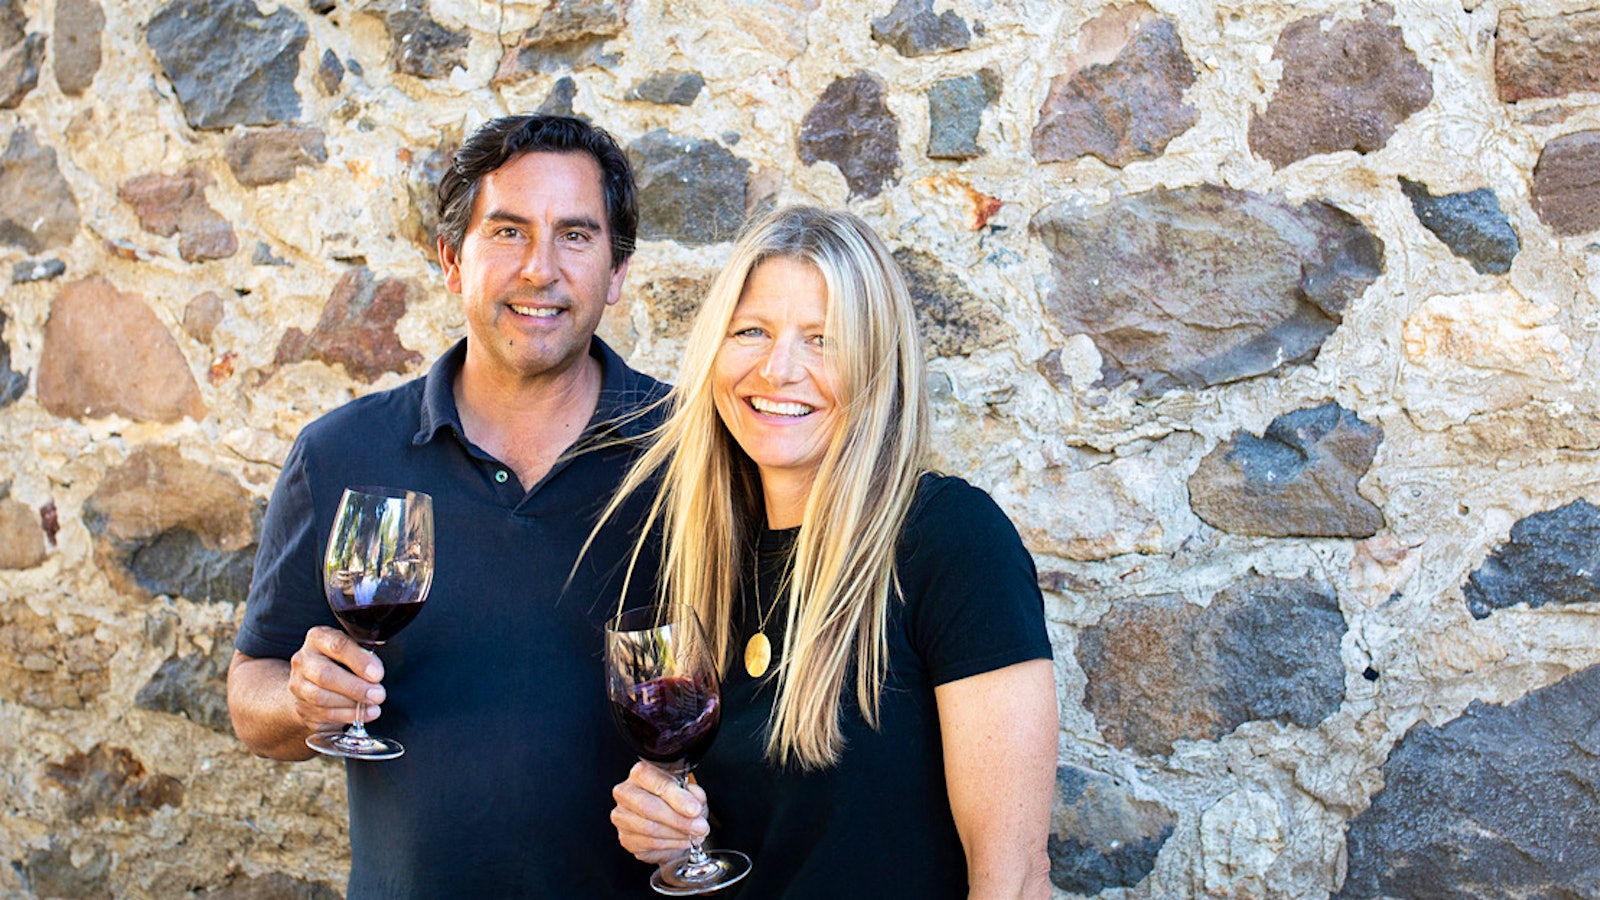  Andy Erickson and Annie Favia pose together holding glasses of red wine